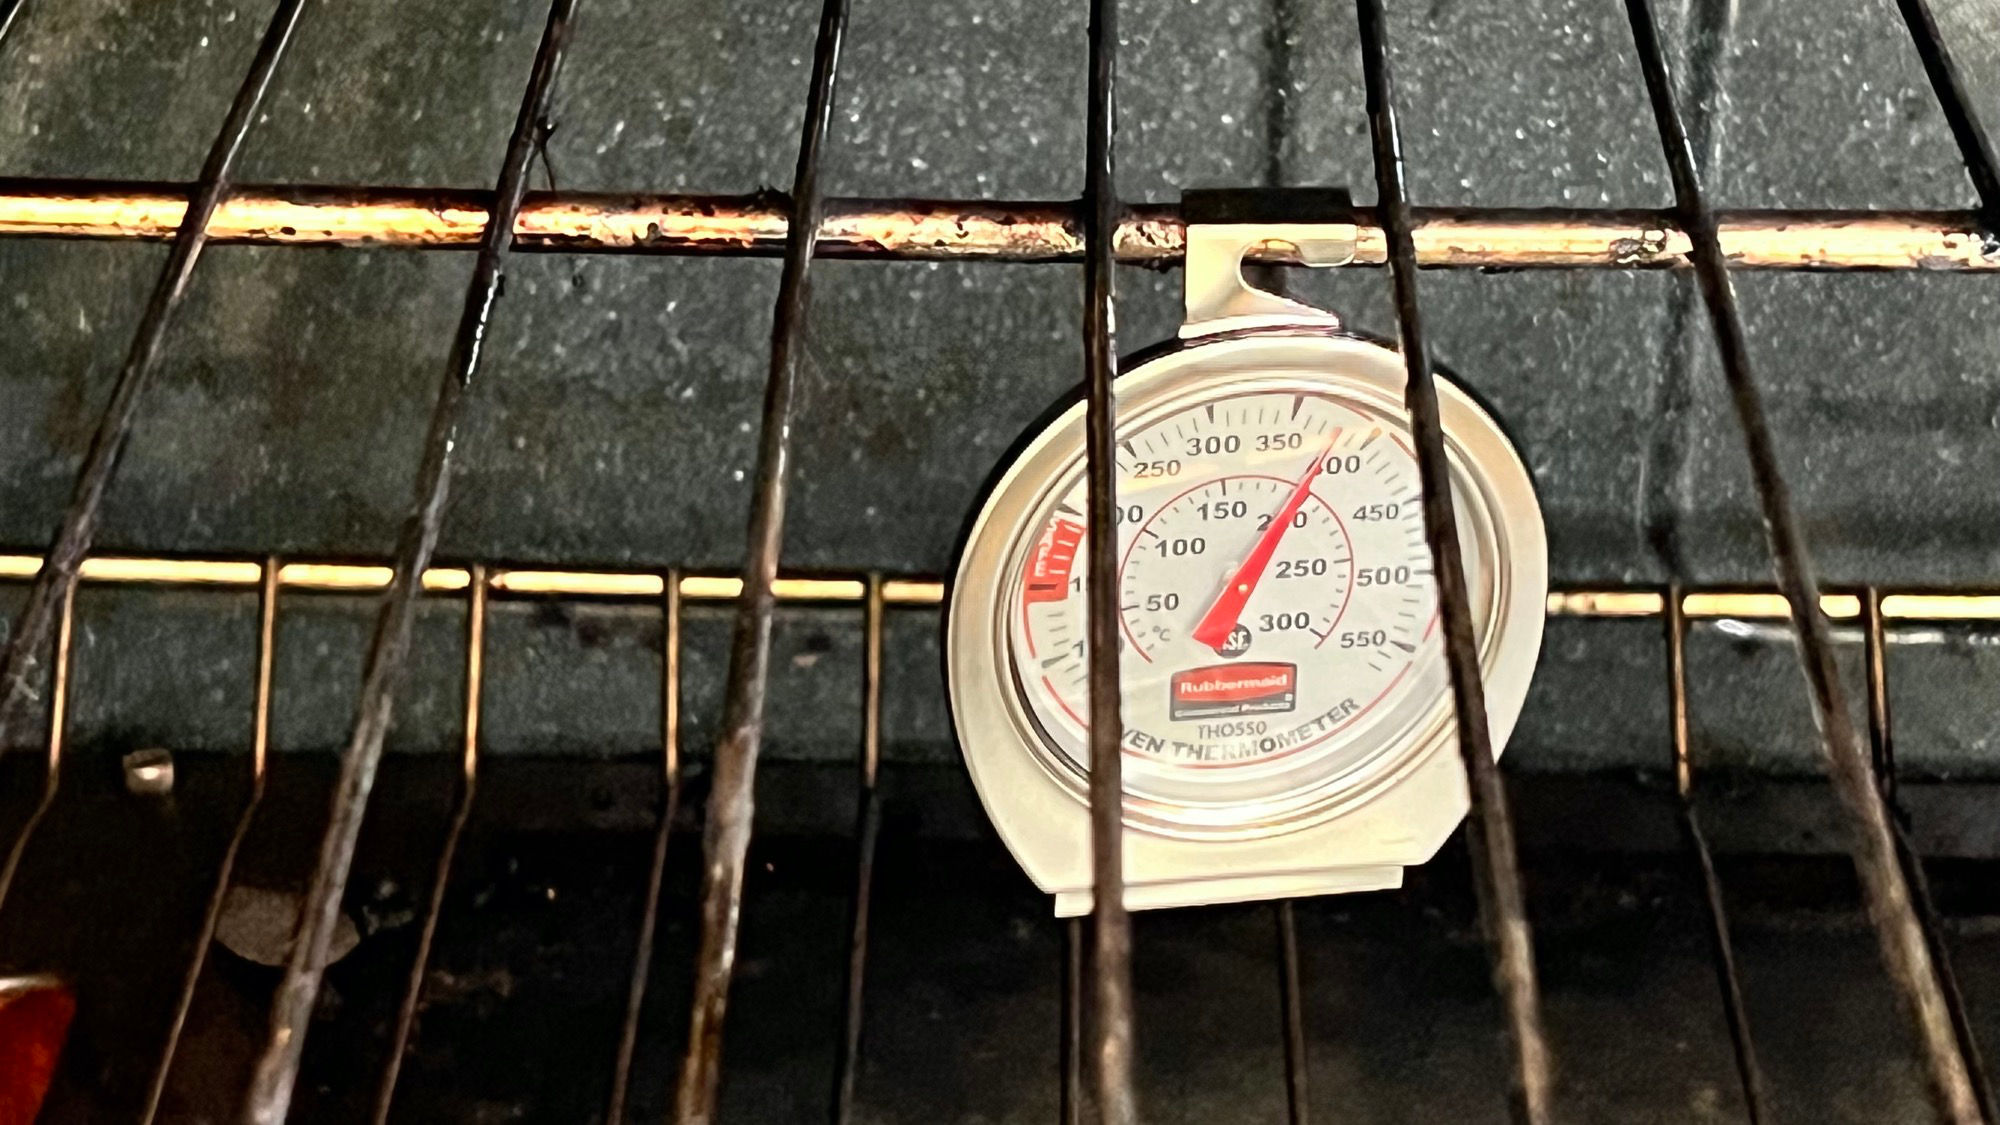 Oven Thermometer Has Both Fahrenheit and Celsius